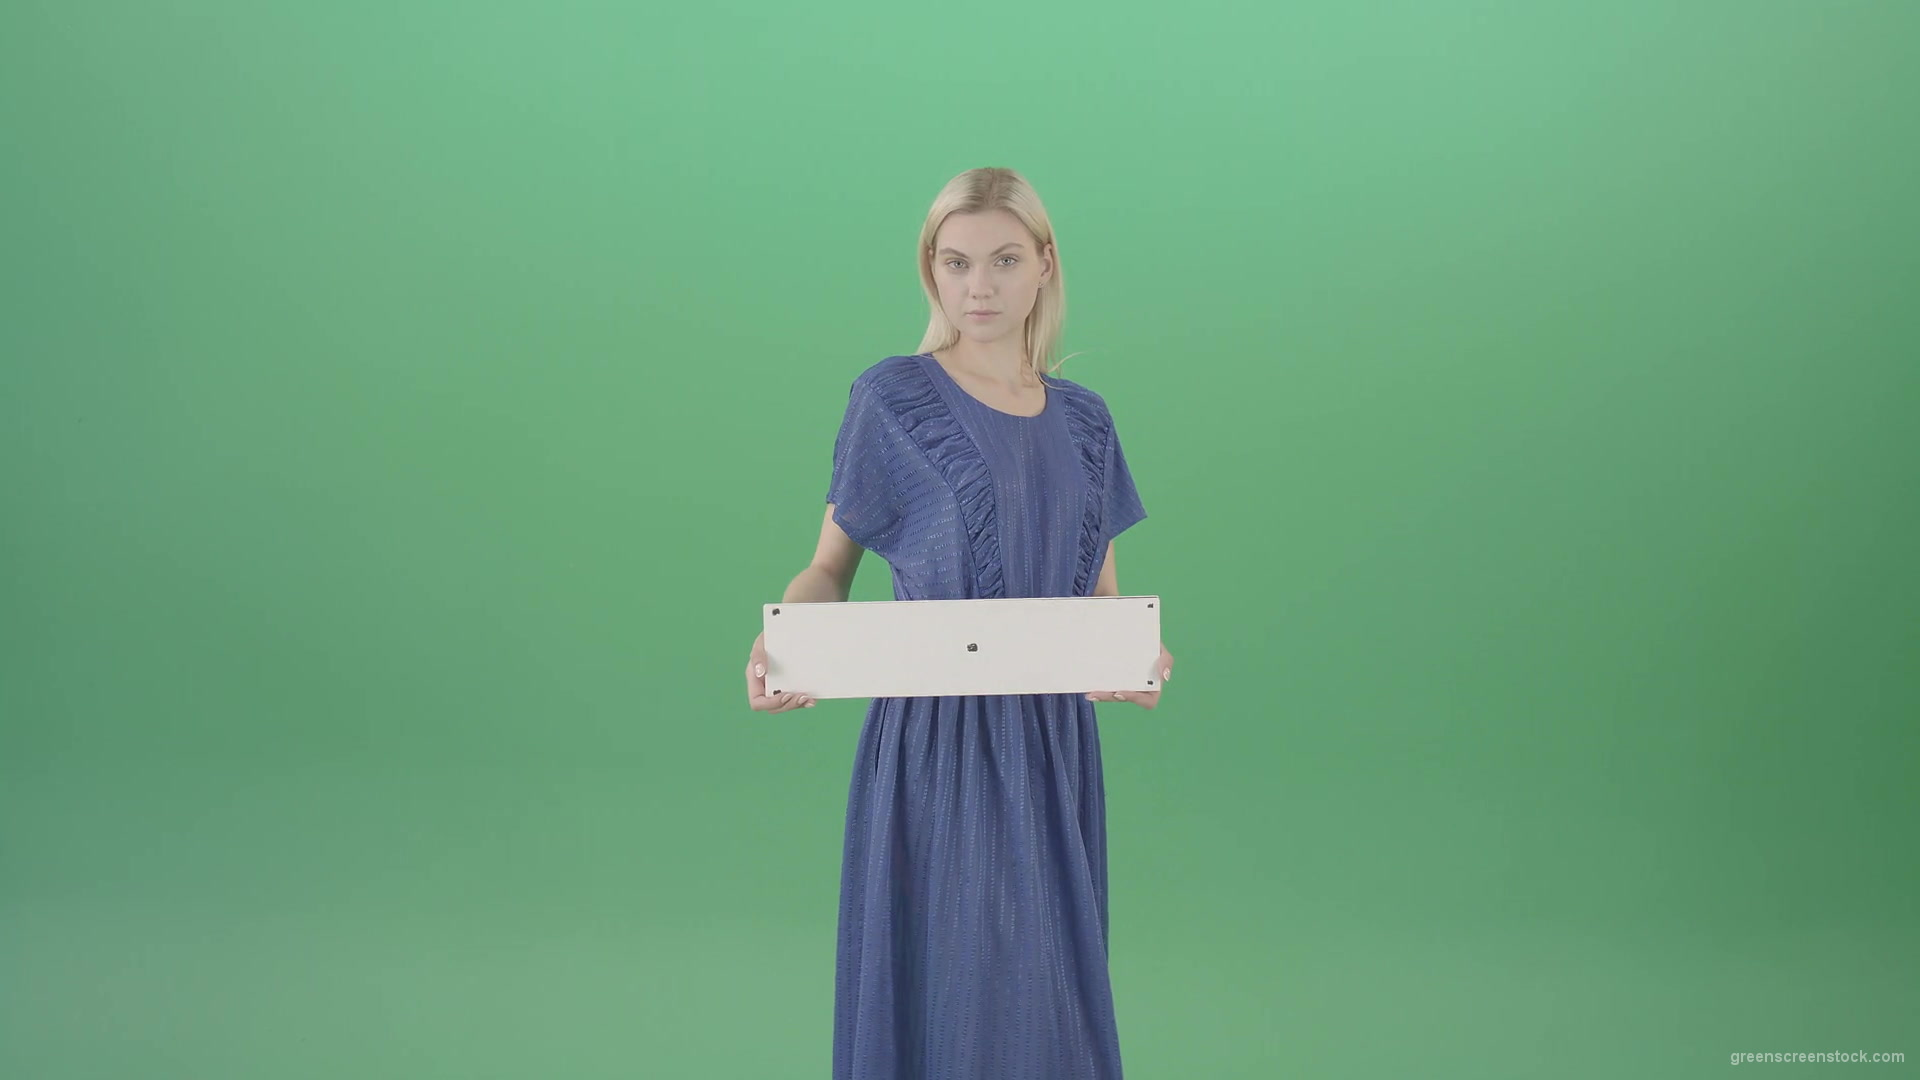 Housewife-in-blue-dress-and-with-text-plane-mockup-posing-isolated-on-Green-Screen-4K-Video-Footage-1-1920_009 Green Screen Stock